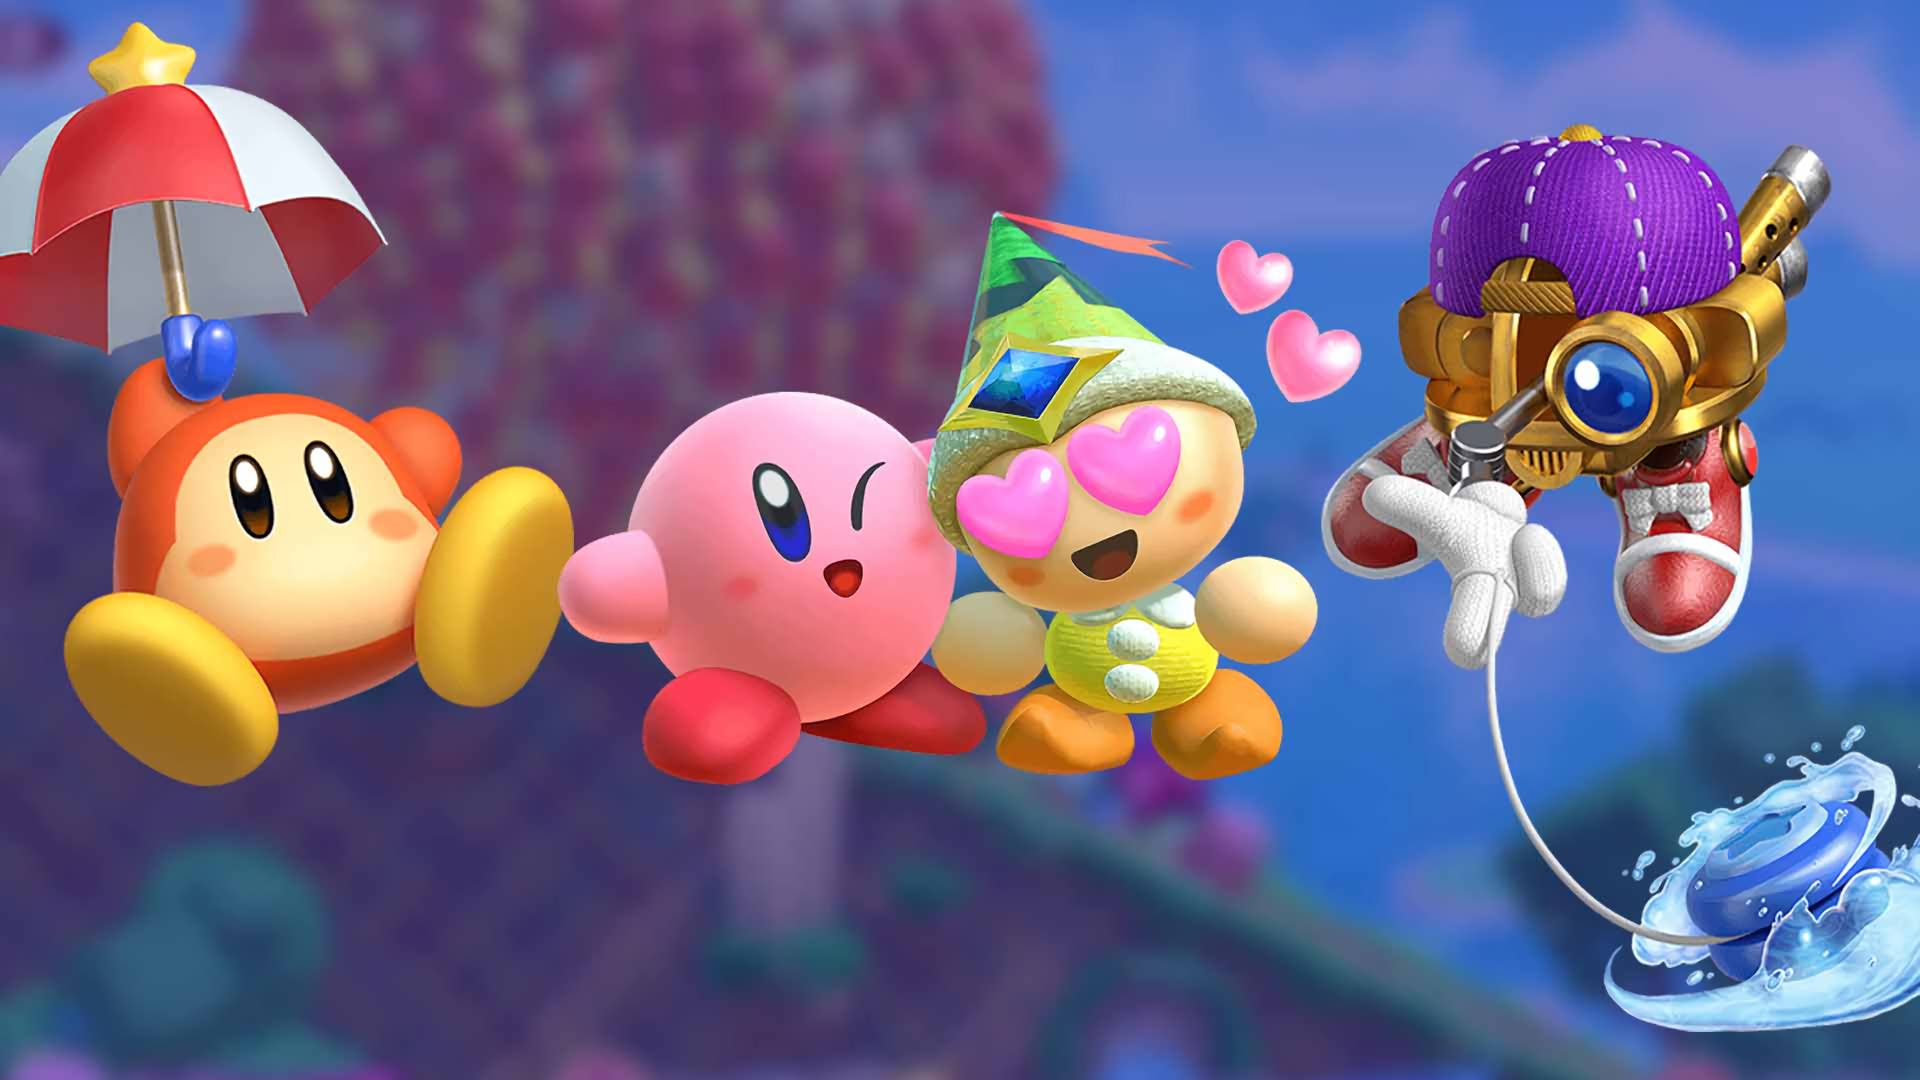 Video Game Kirby: Star Allies HD Wallpaper Background Image.